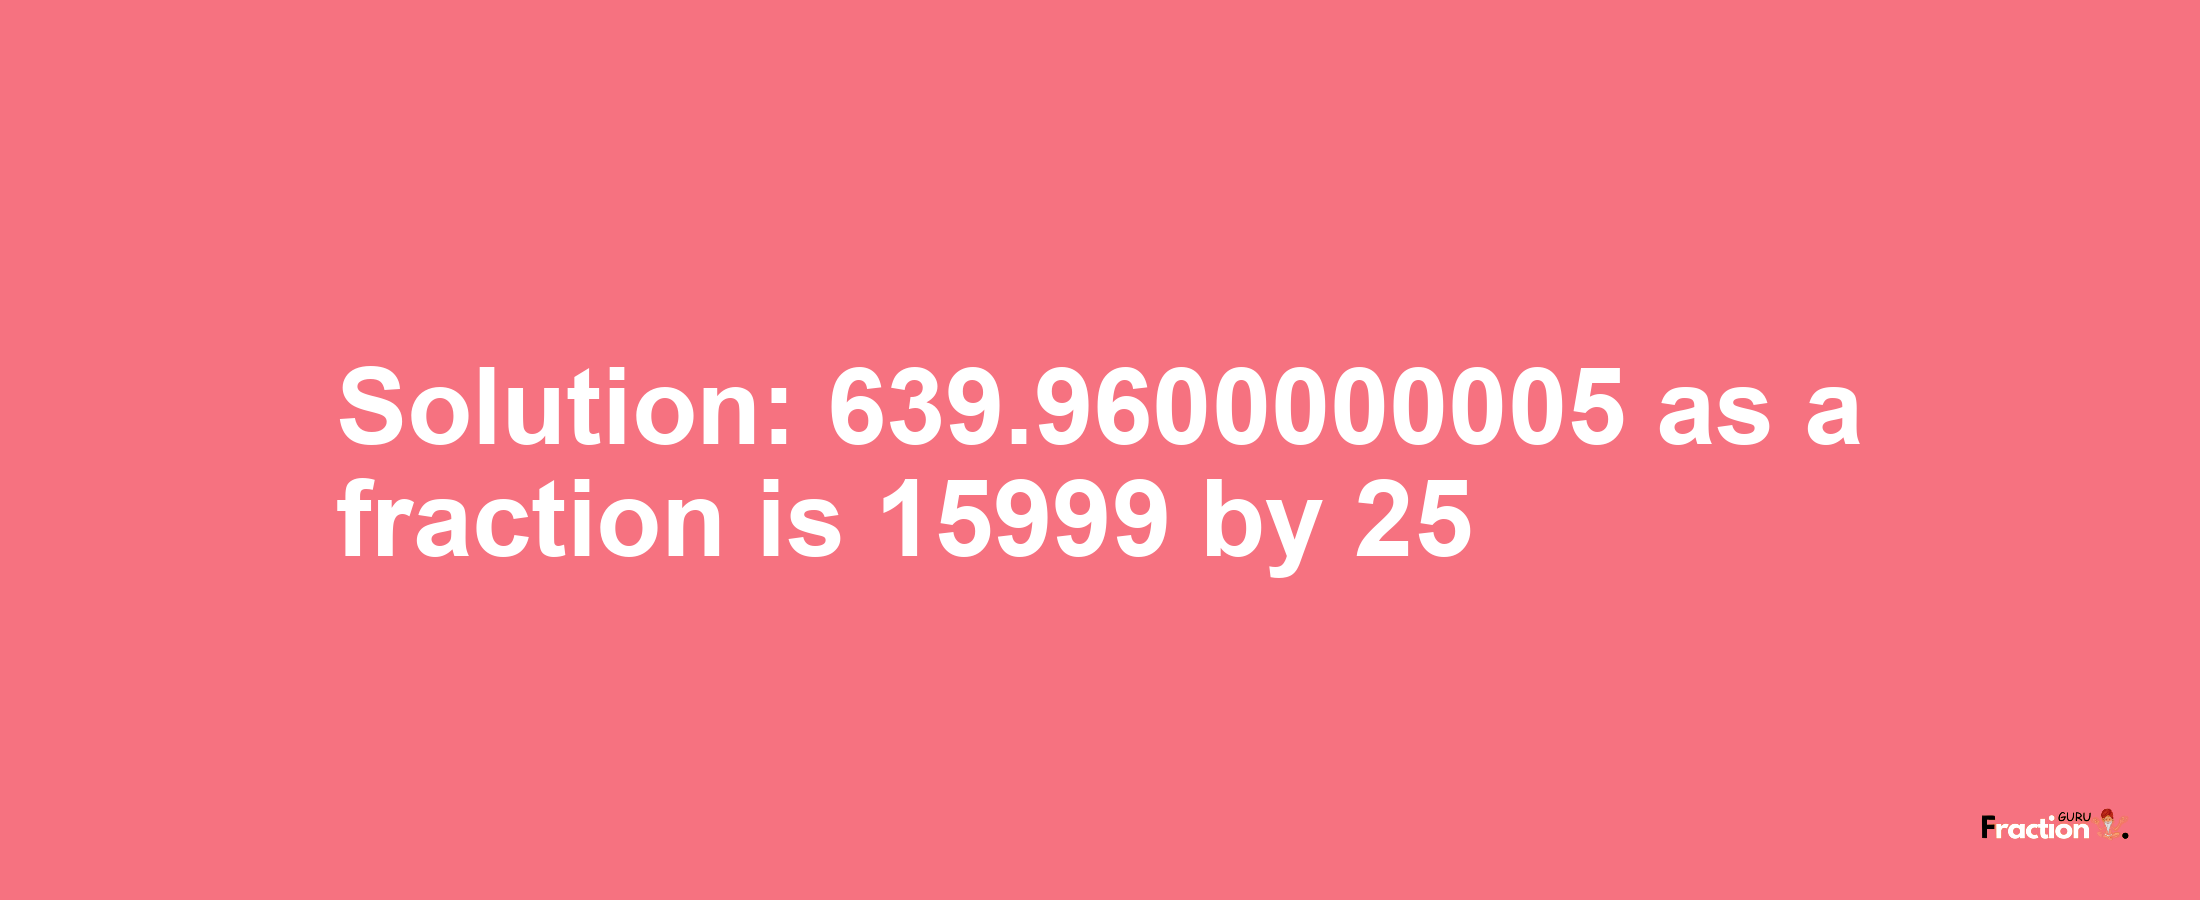 Solution:639.9600000005 as a fraction is 15999/25